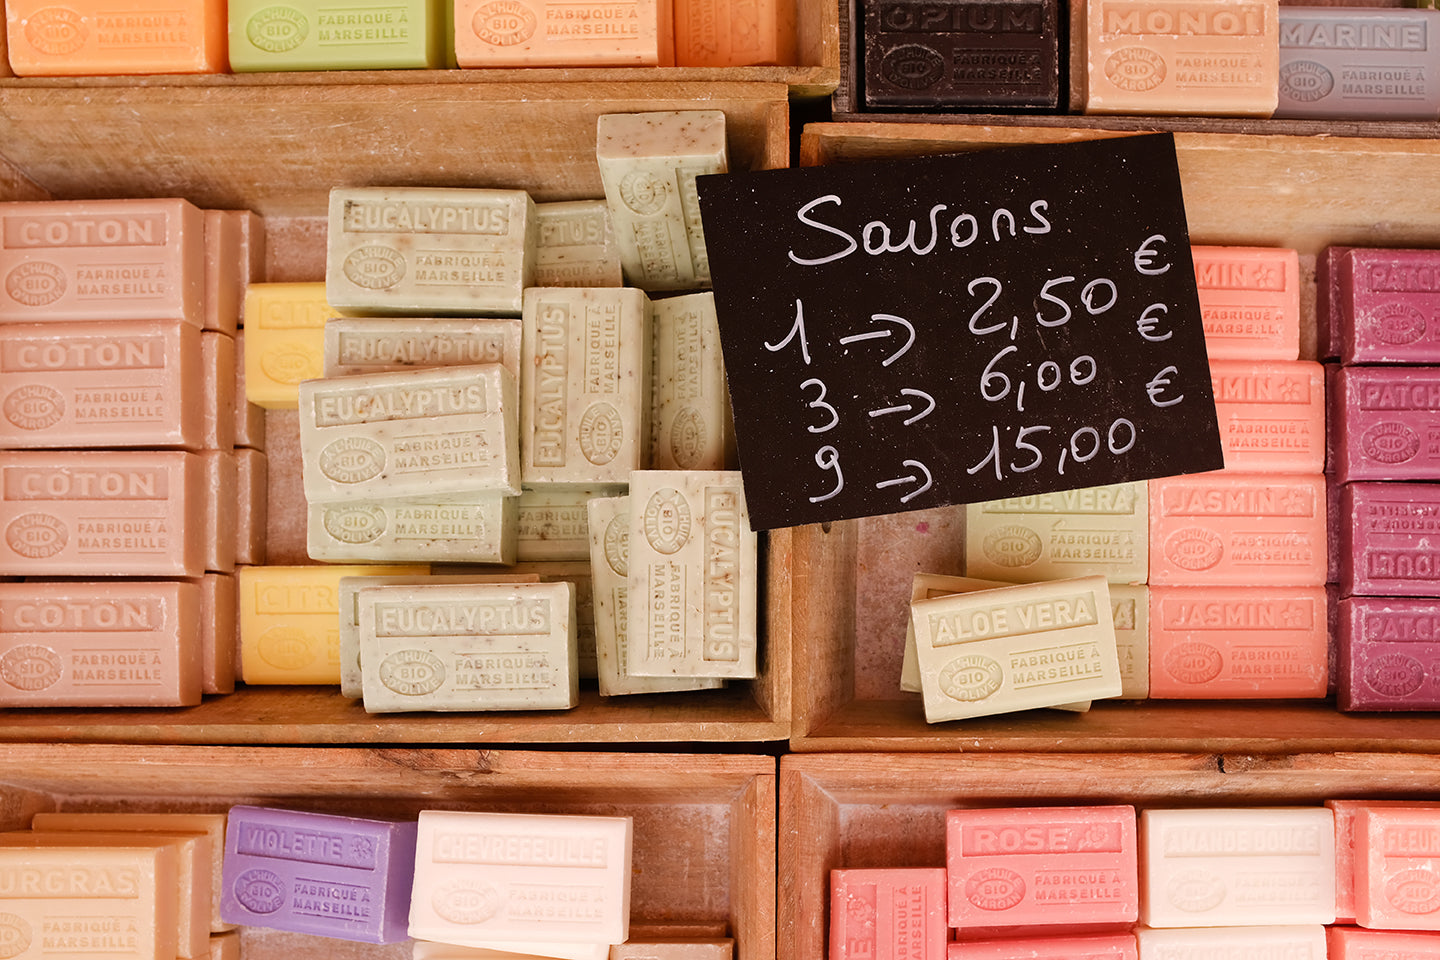 Soaps from the Market in The South of France - Every Day Paris 